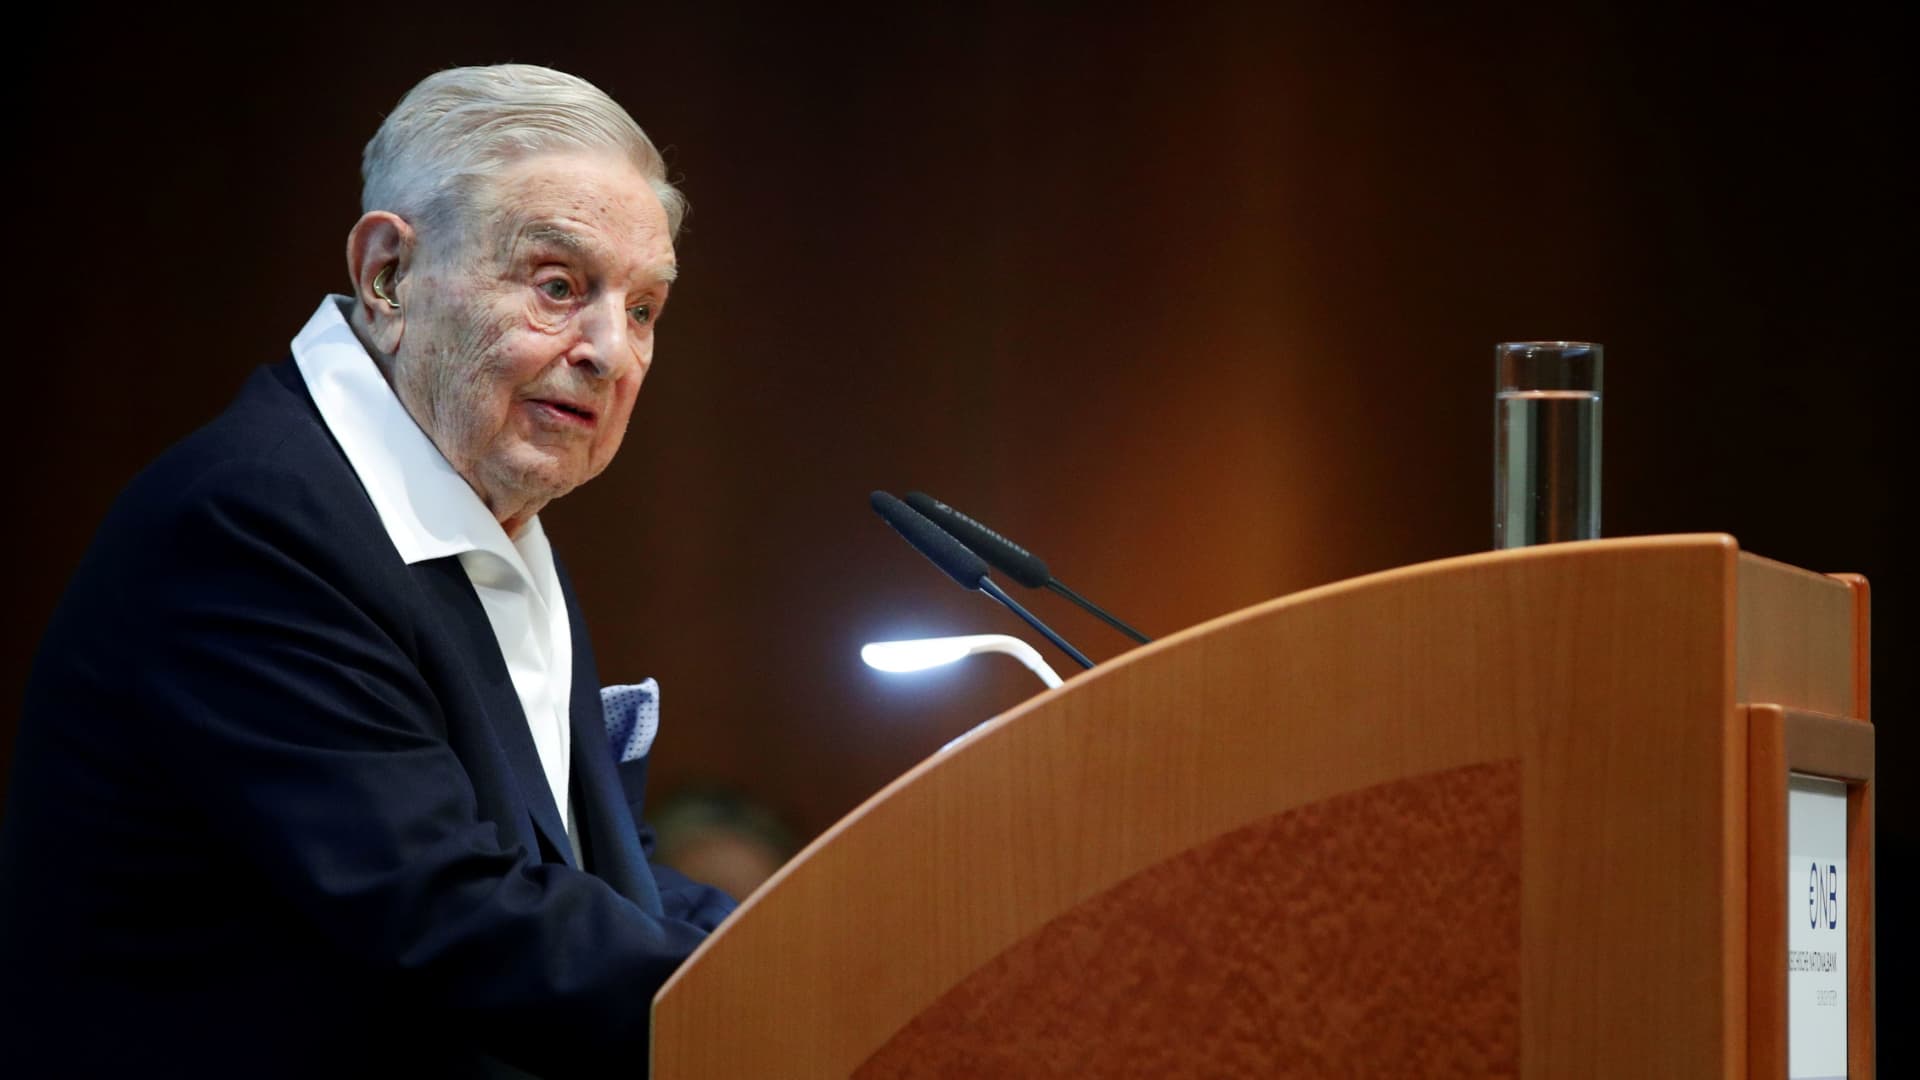 Billionaire investor George Soros speaks to the audience at the Schumpeter Award in Vienna, Austria June 21, 2019.